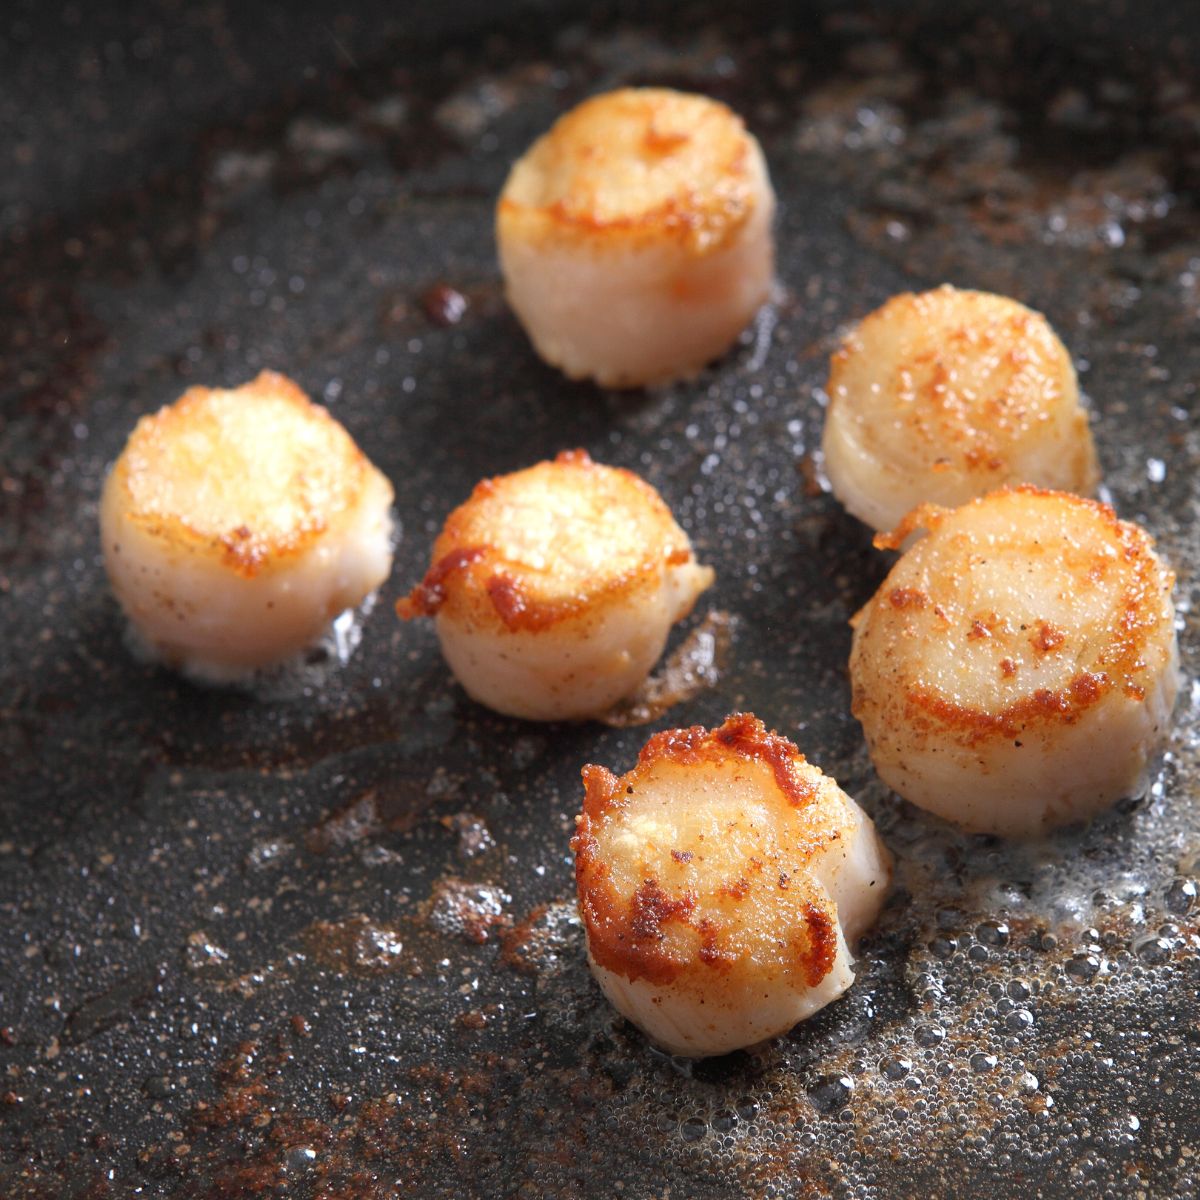 Scallops cooking in butter in a pan